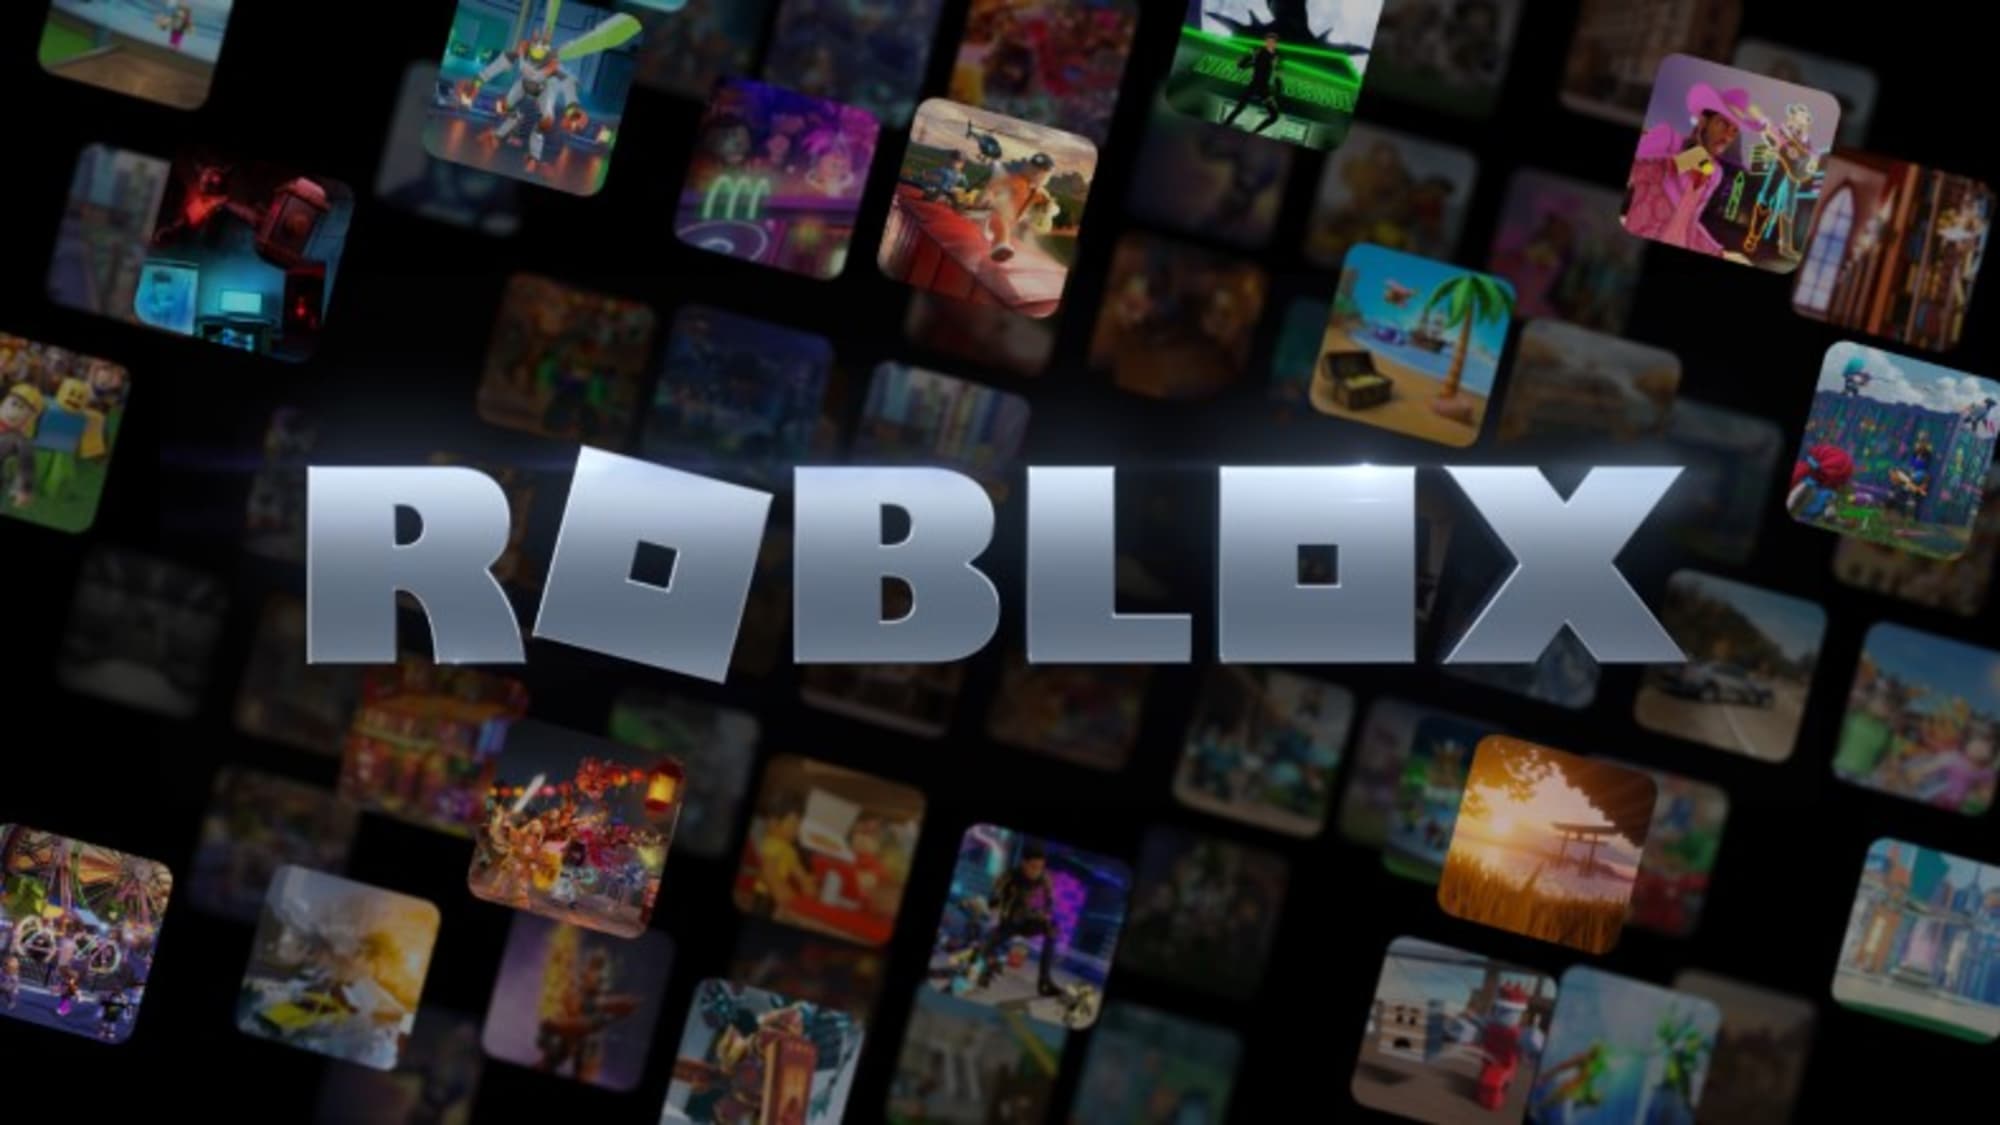 How to get free Robux April 2023